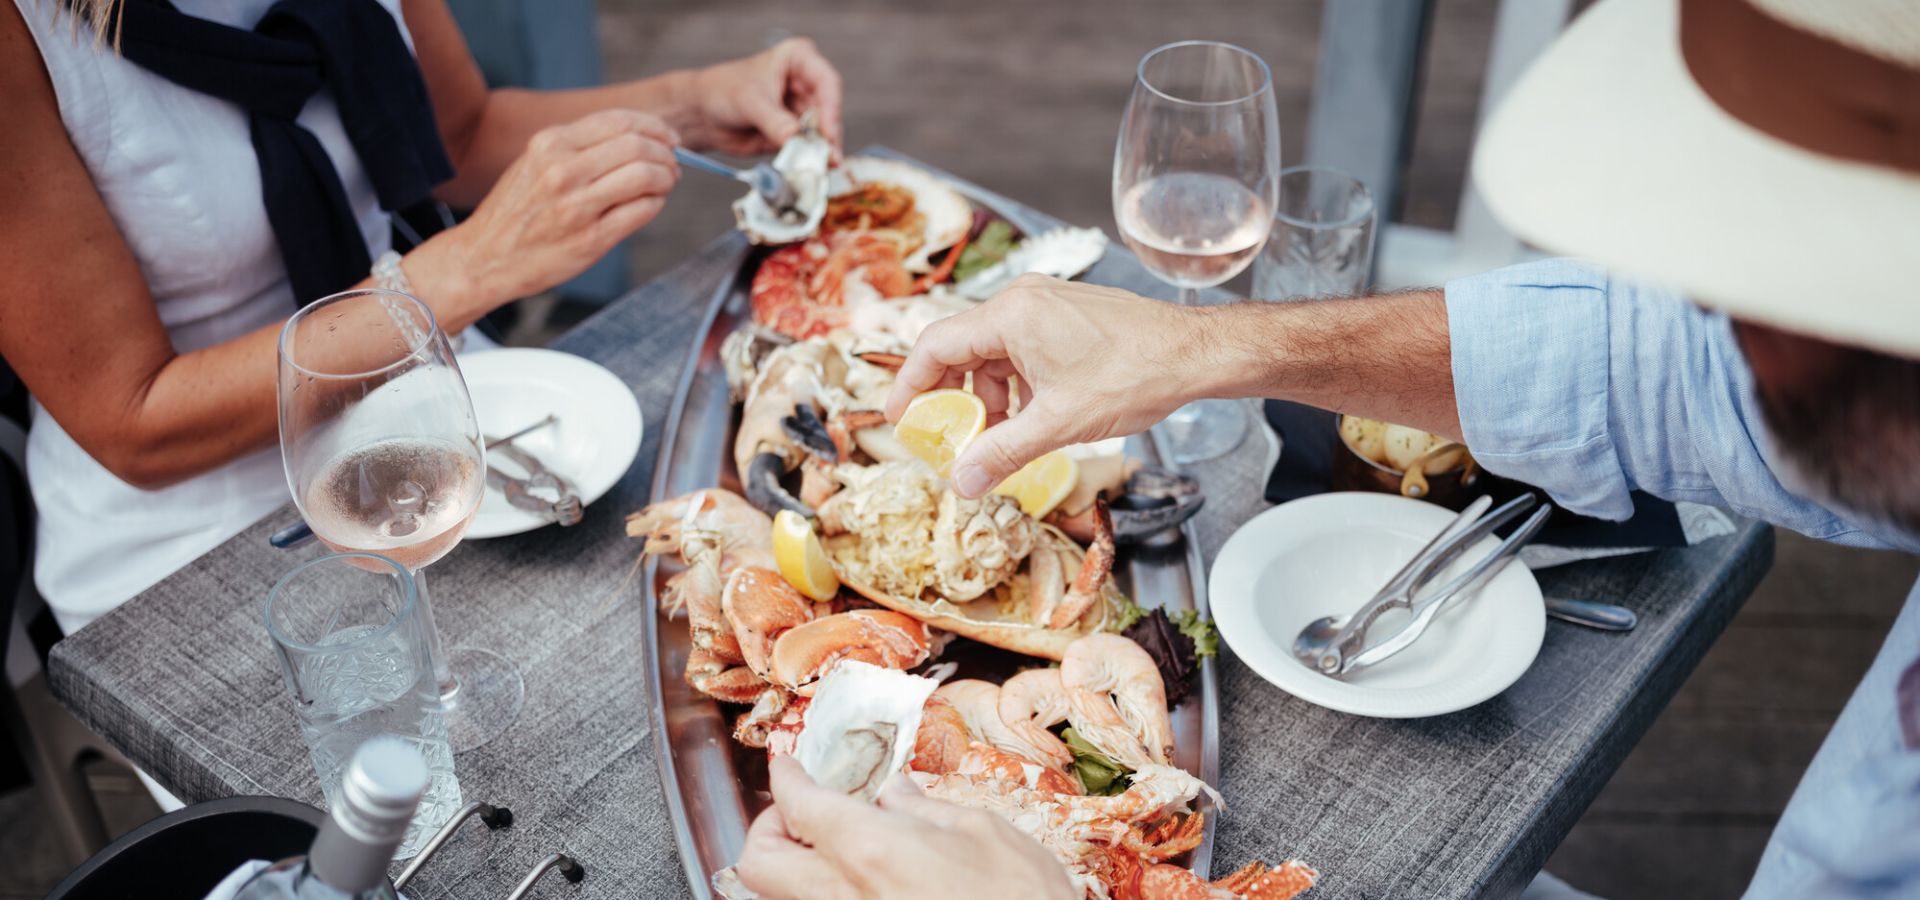 valor buffet maletero 10 places to eat Jersey lobster | Inspiration | Visit Jersey